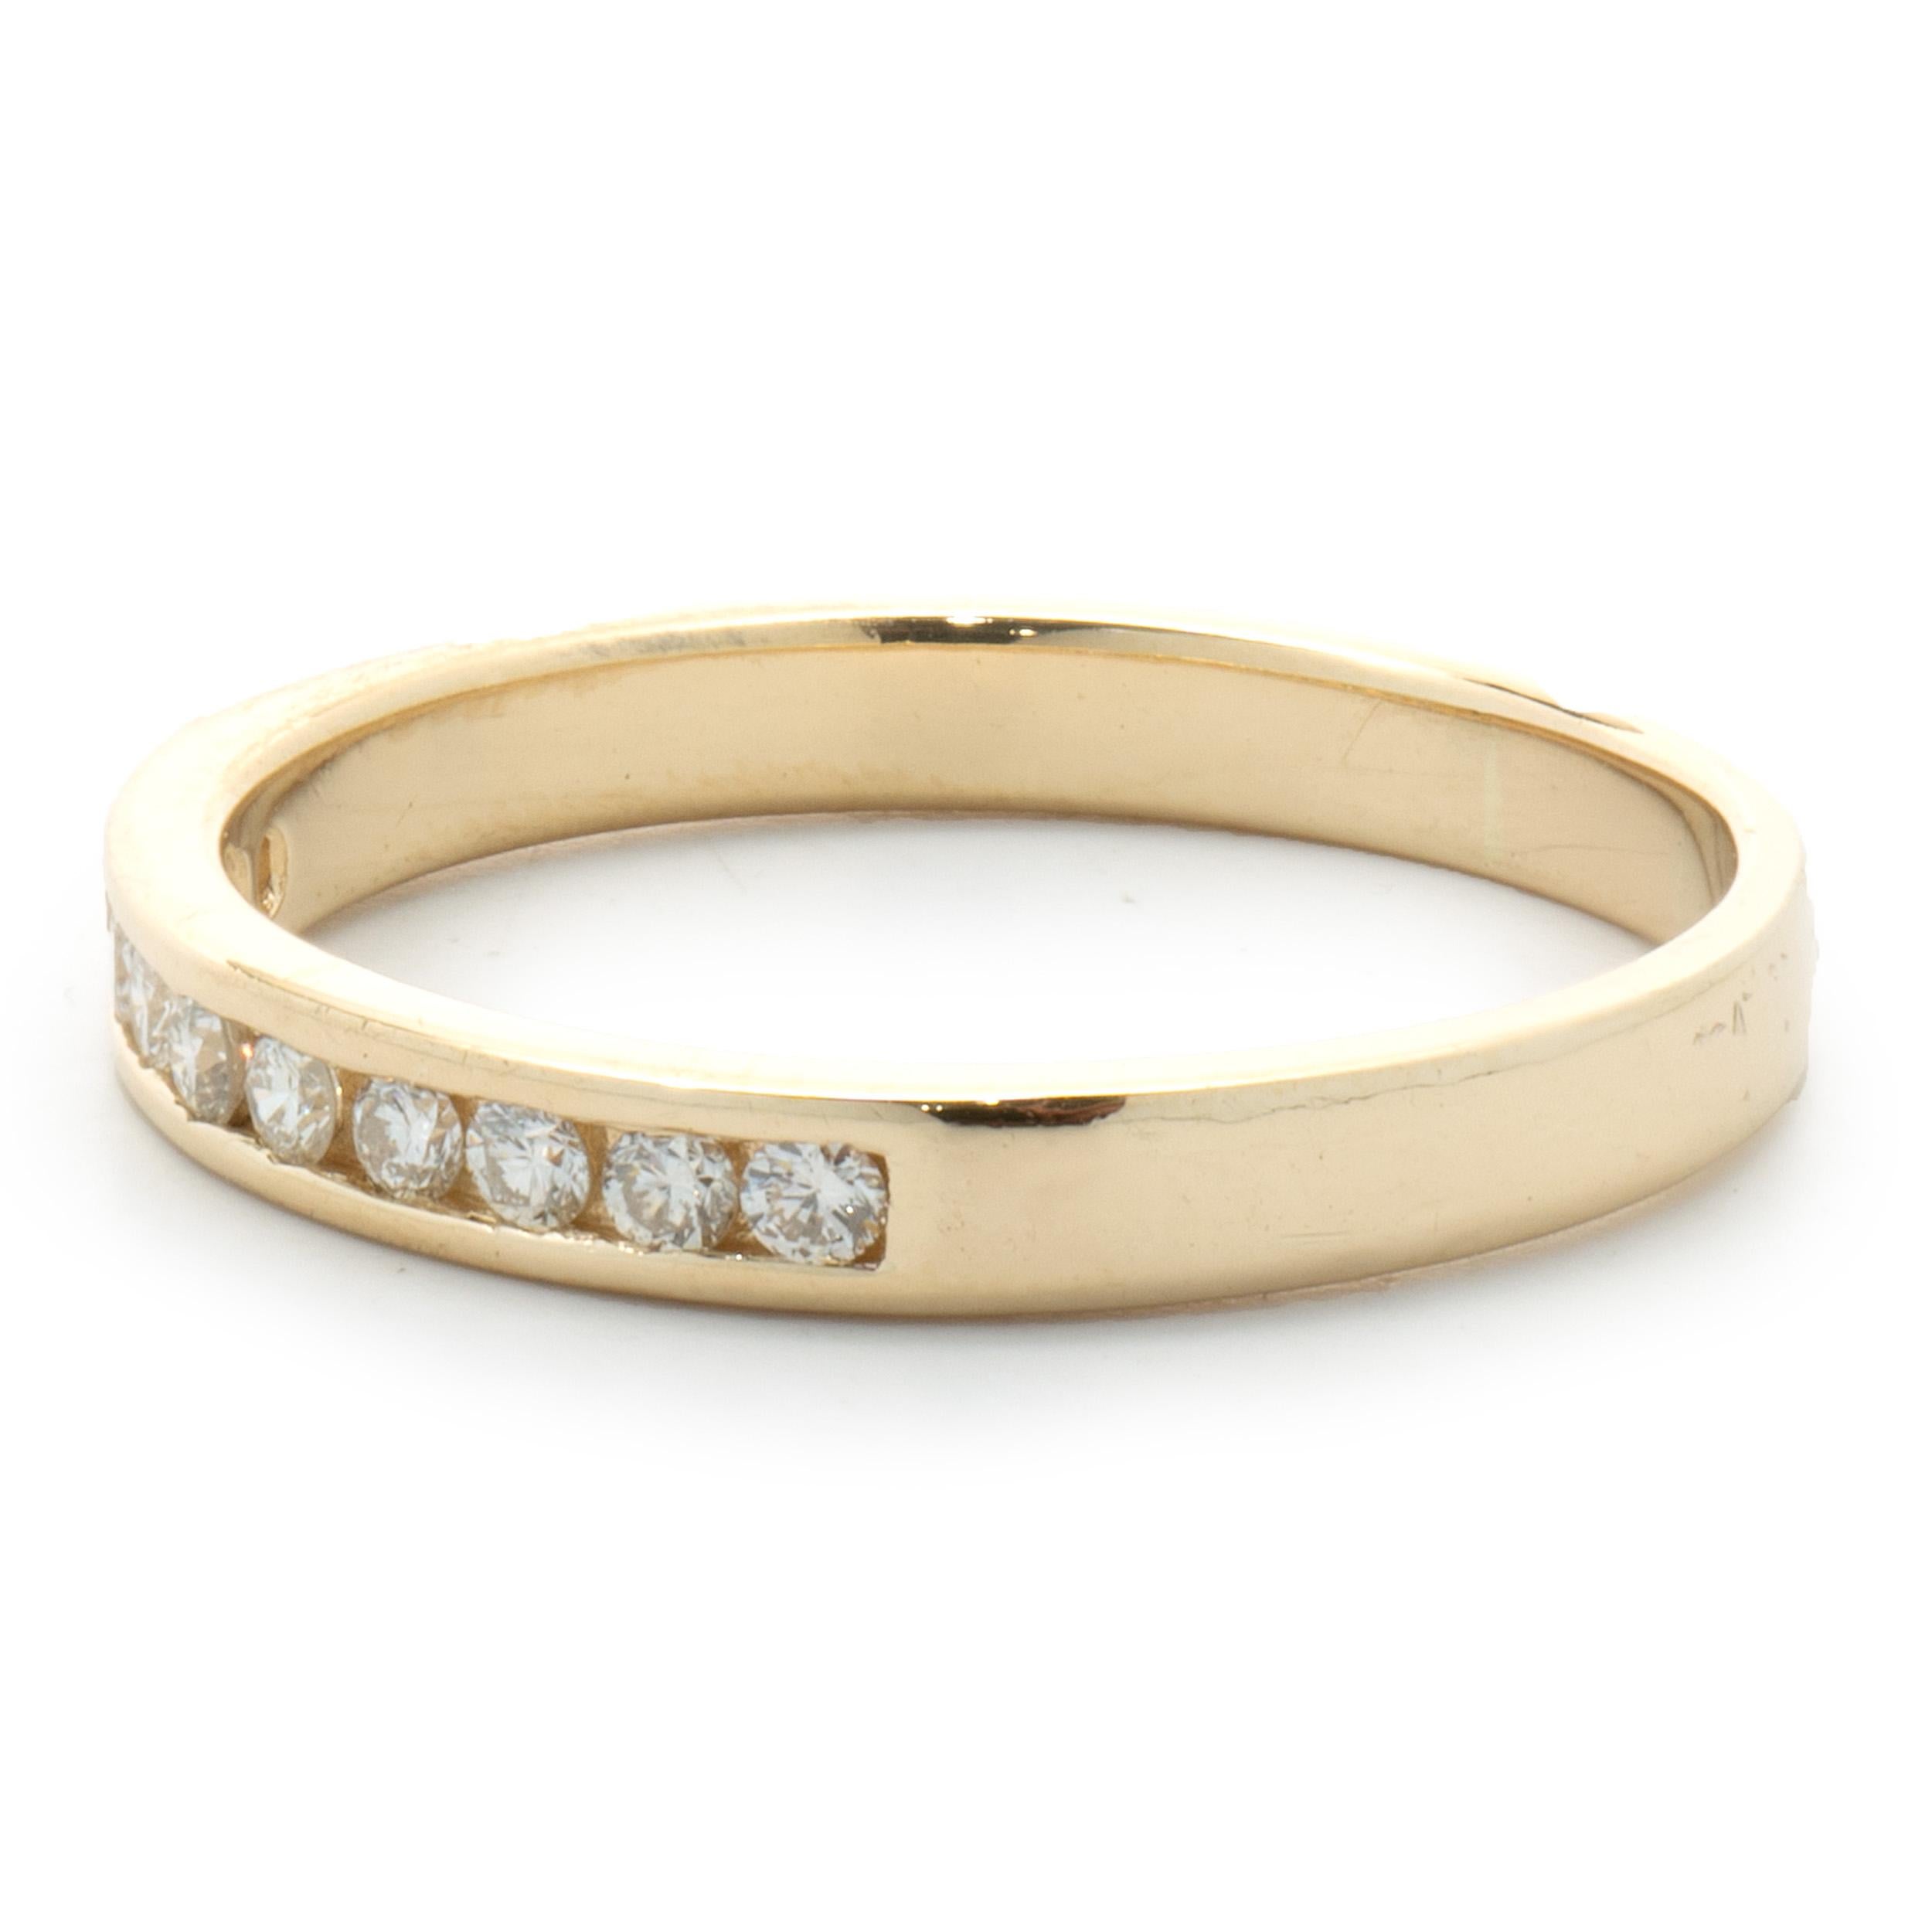 Designer: Custom
Material: 14K yellow gold
Diamonds: 10 round brilliant cut = 0.15cttw
Color: I
Clarity: SI1-2
Size: 7.75 sizing available 
Dimensions: ring measures 2.8mm in width
Weight: 2.36 grams